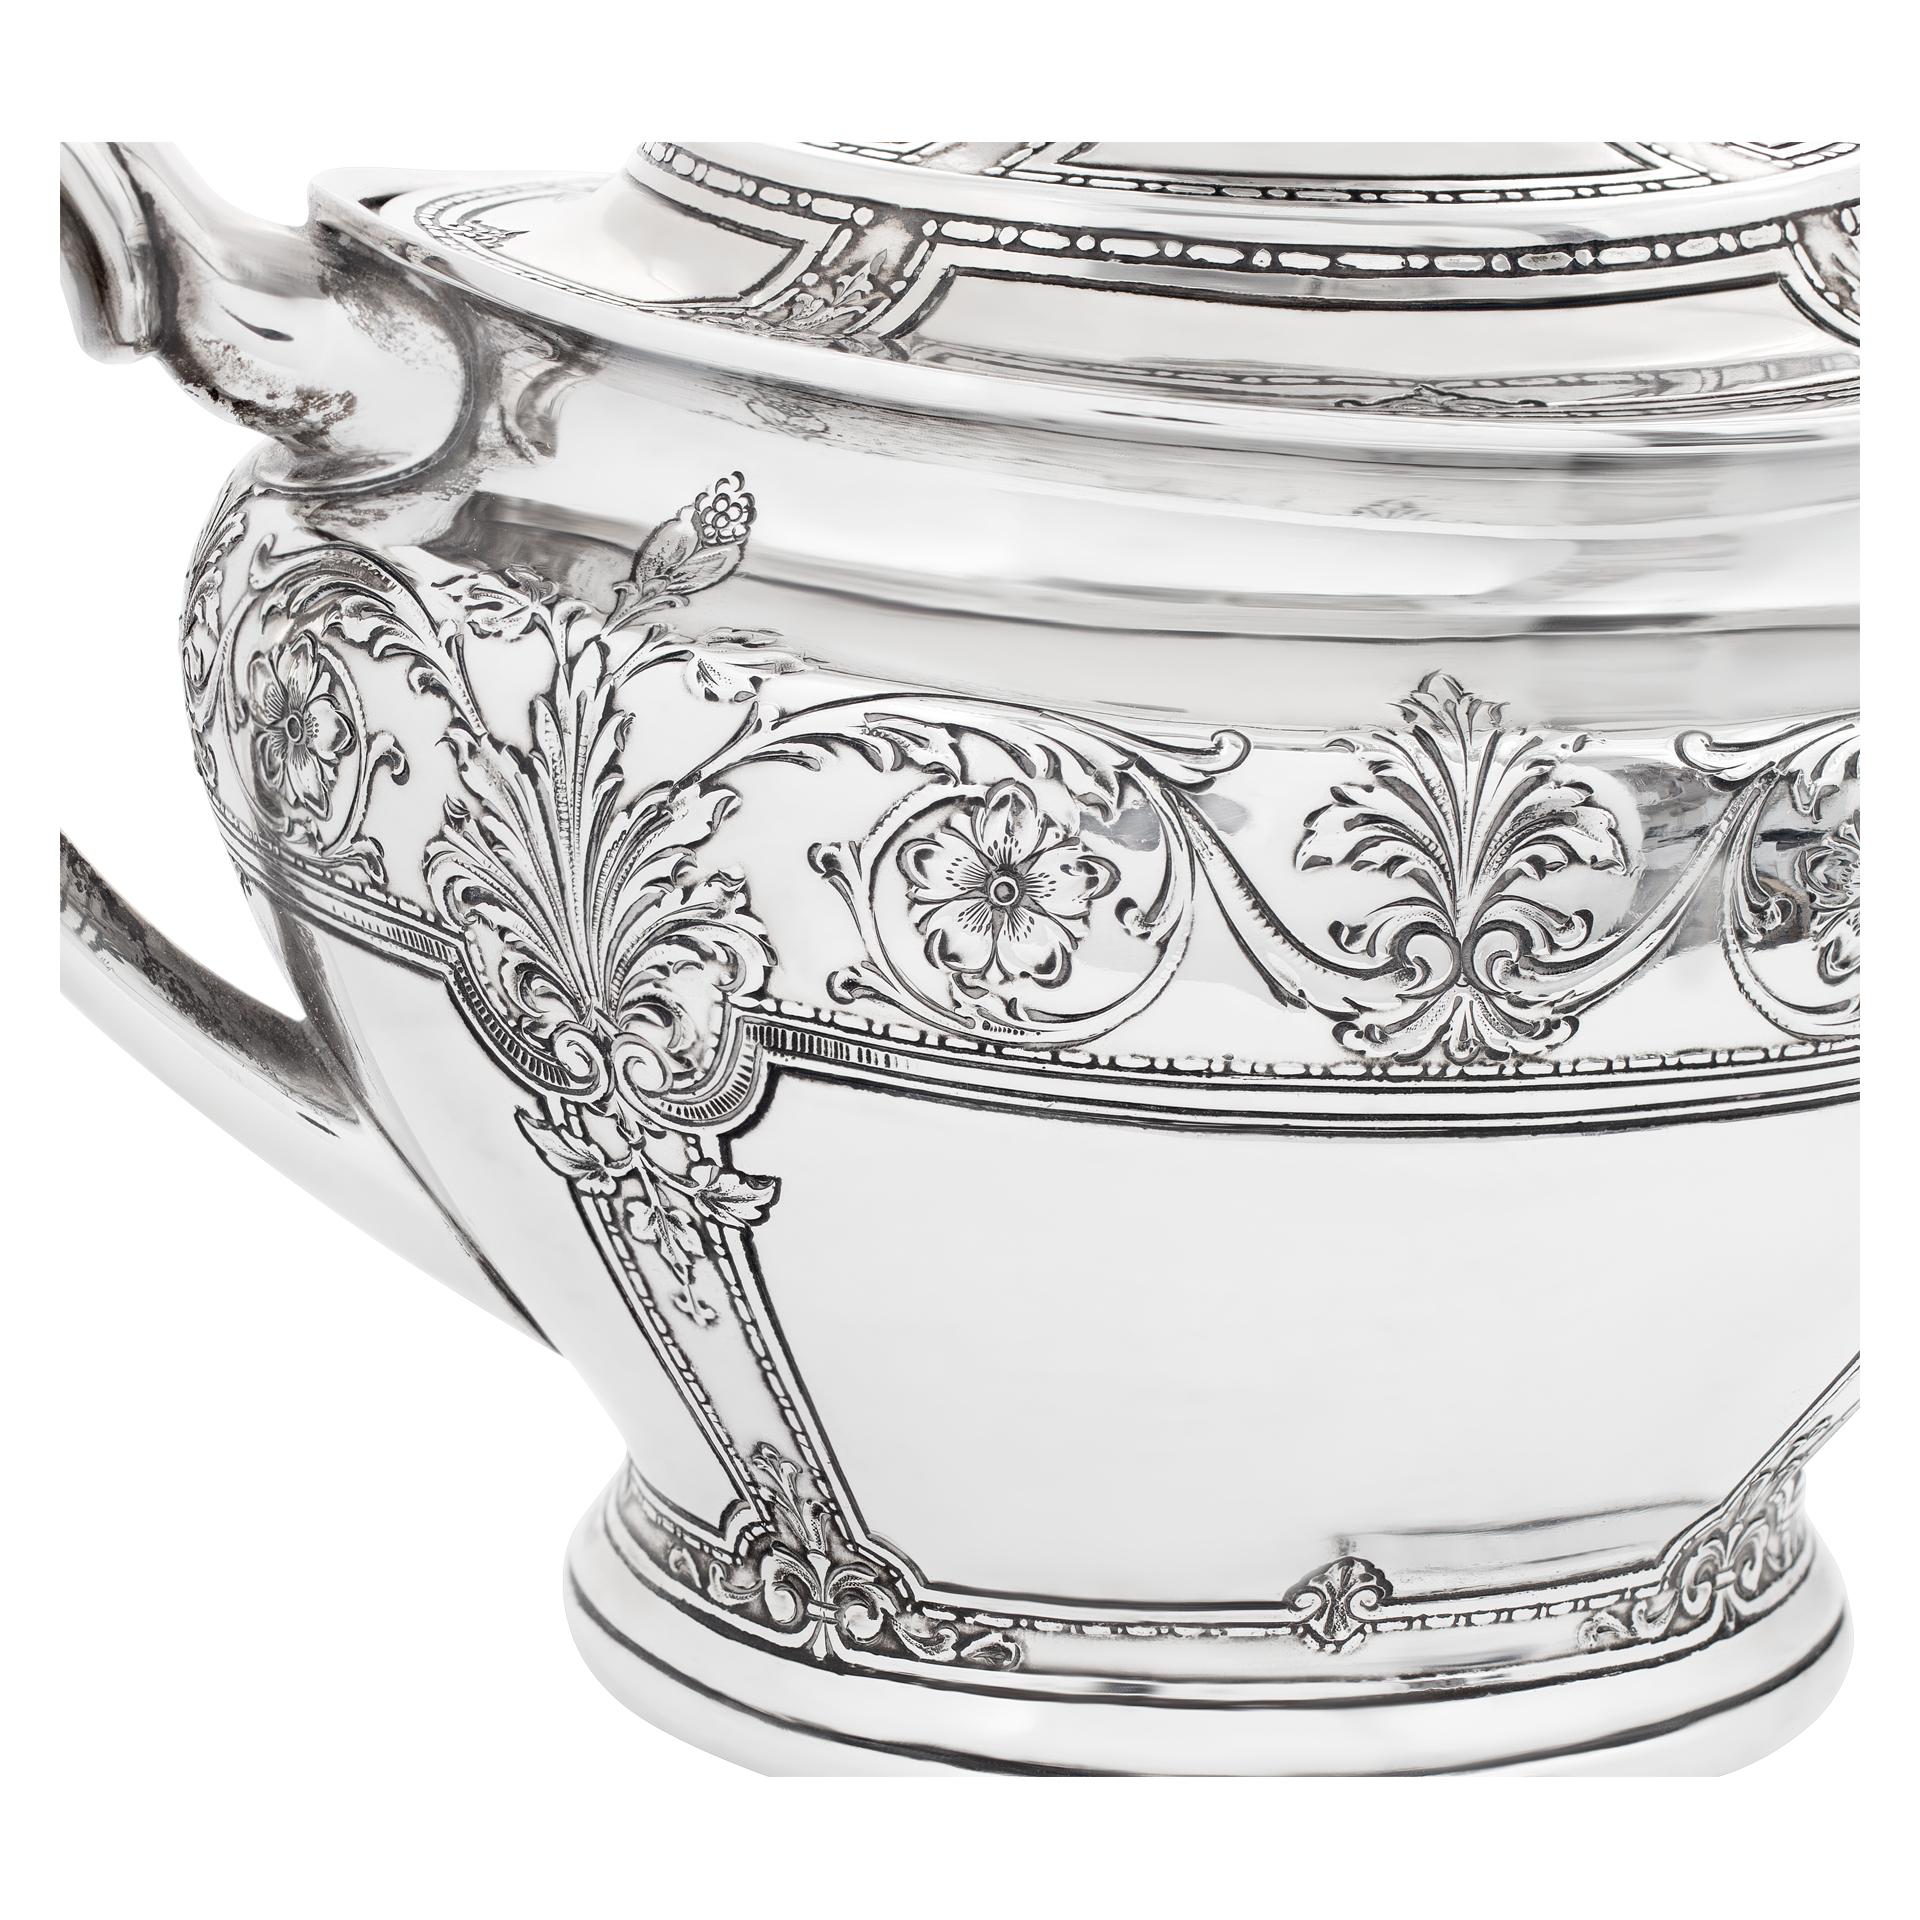 Charming Victorian 4 pieces tea/coffee sterling silver set, by the Lebkuecher & Co Sterling Silver Company from Newark, New Jersey (in businesss from 1896 to 1909) - Over 1556 grams sterling silver (over 50 troy ounces).4 pieces sterling silver tea